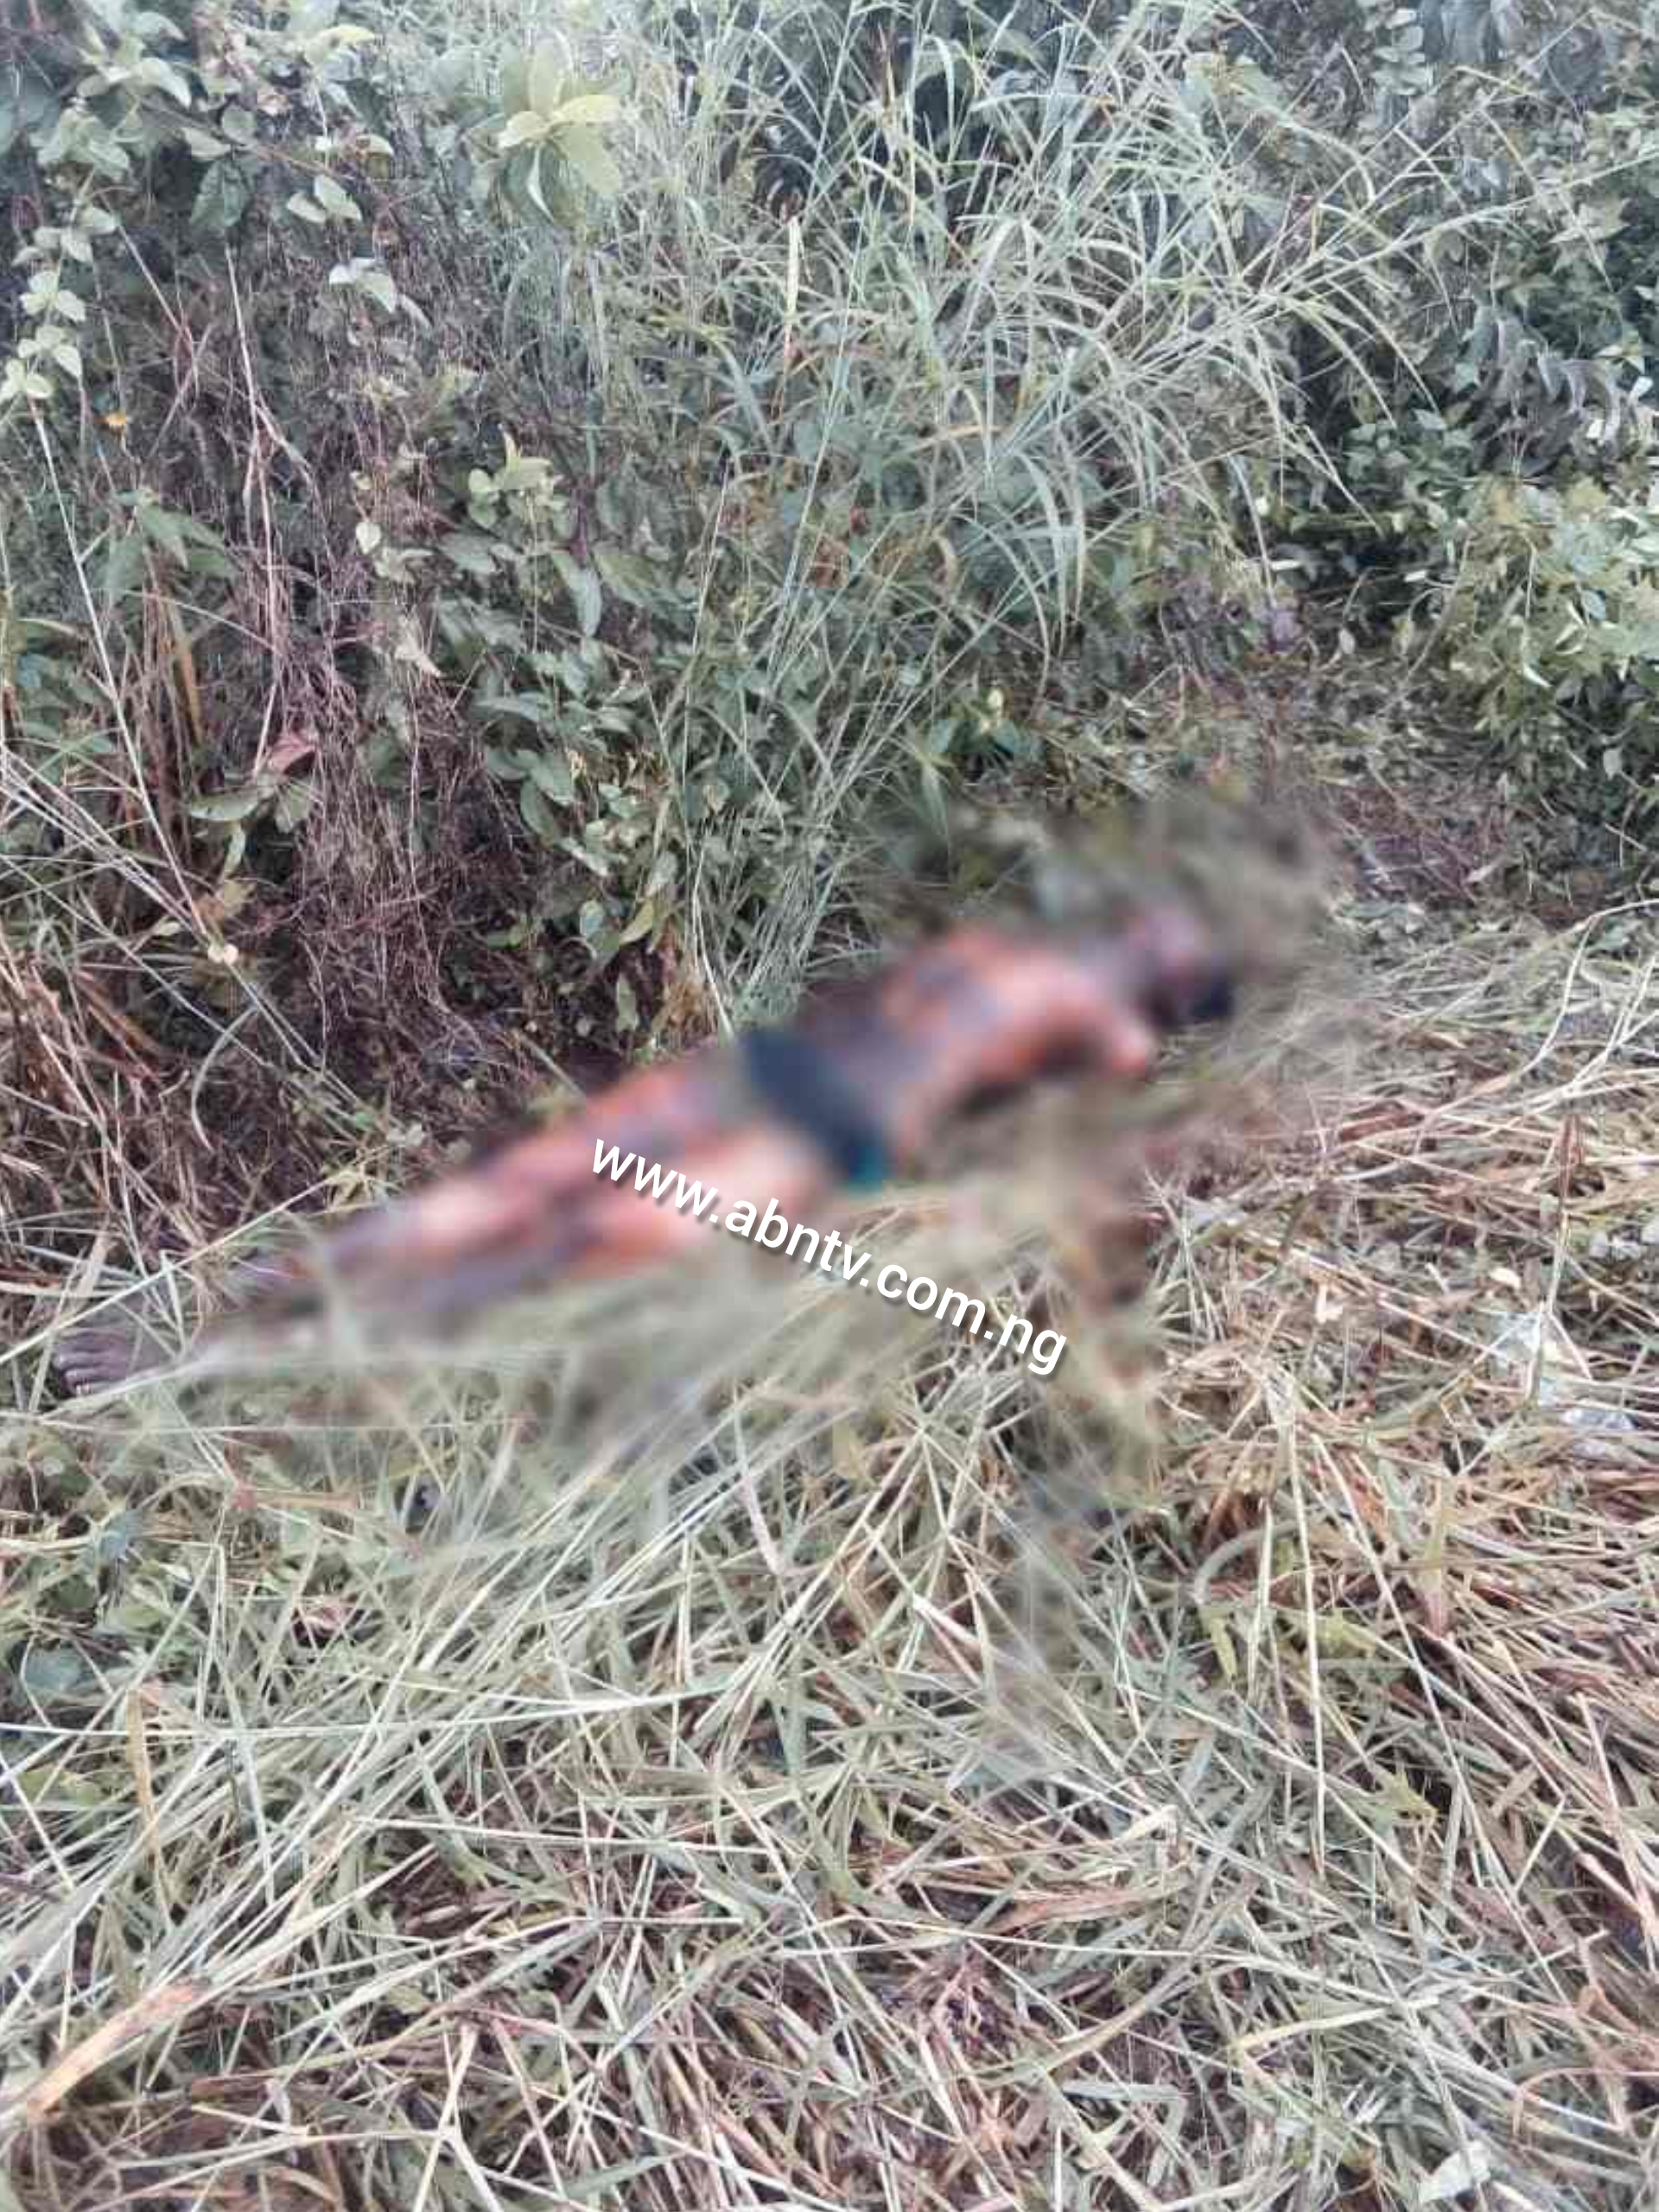 Lifeless Body With Marks Of Burns Recovered In Umuahia (Photo)